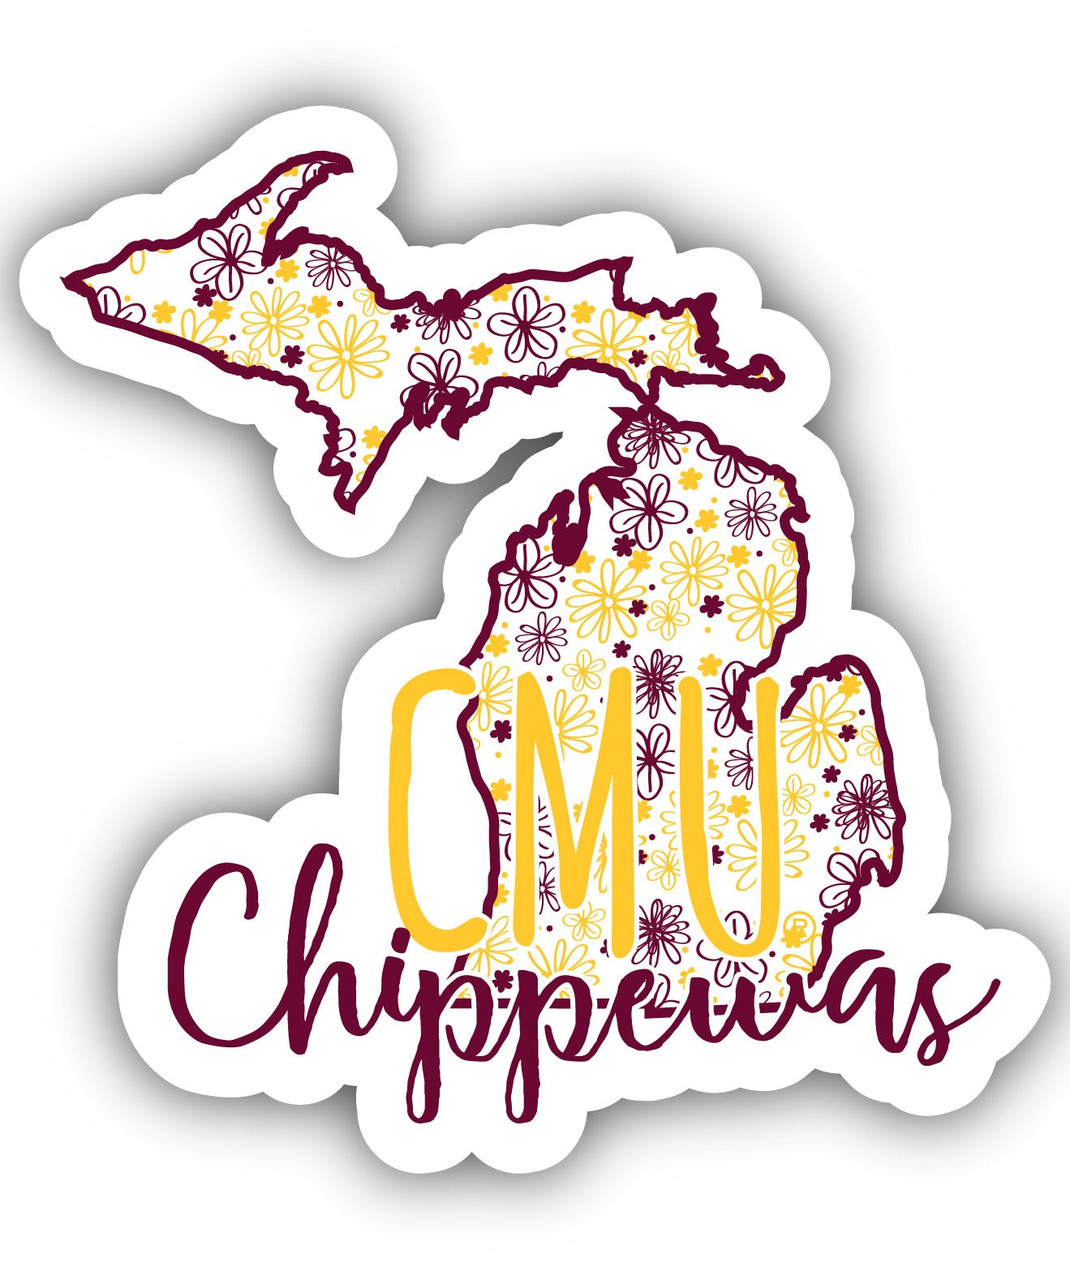 Central Michigan University Floral State Die Cut Decal 2-Inch